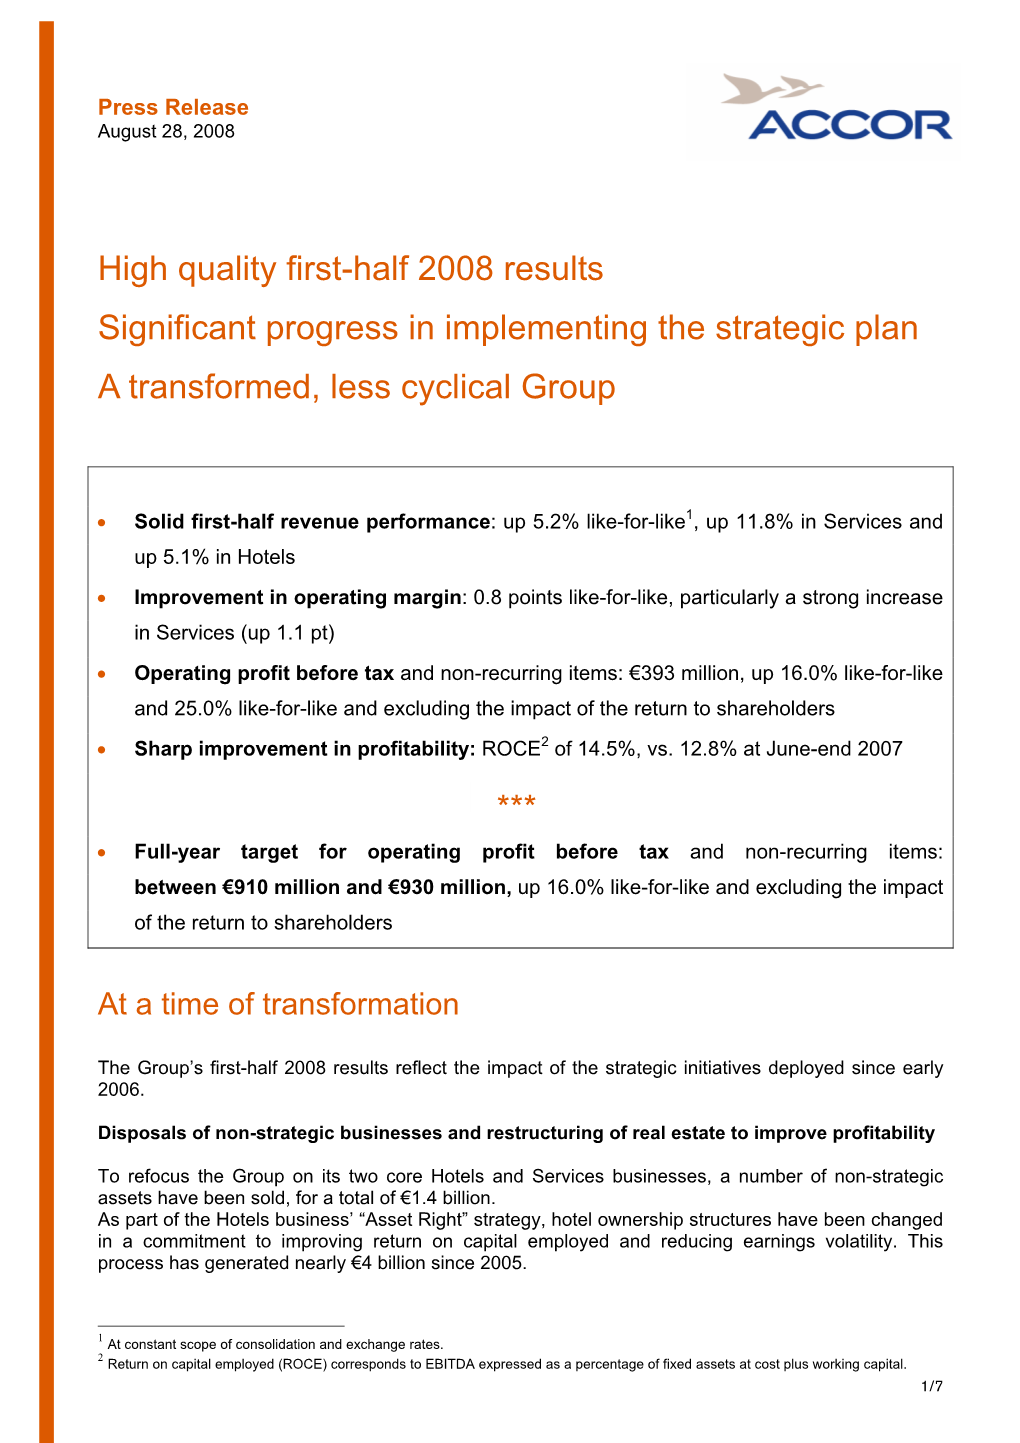 High Quality First-Half 2008 Results Significant Progress in Implementing the Strategic Plan a Transformed, Less Cyclical Group